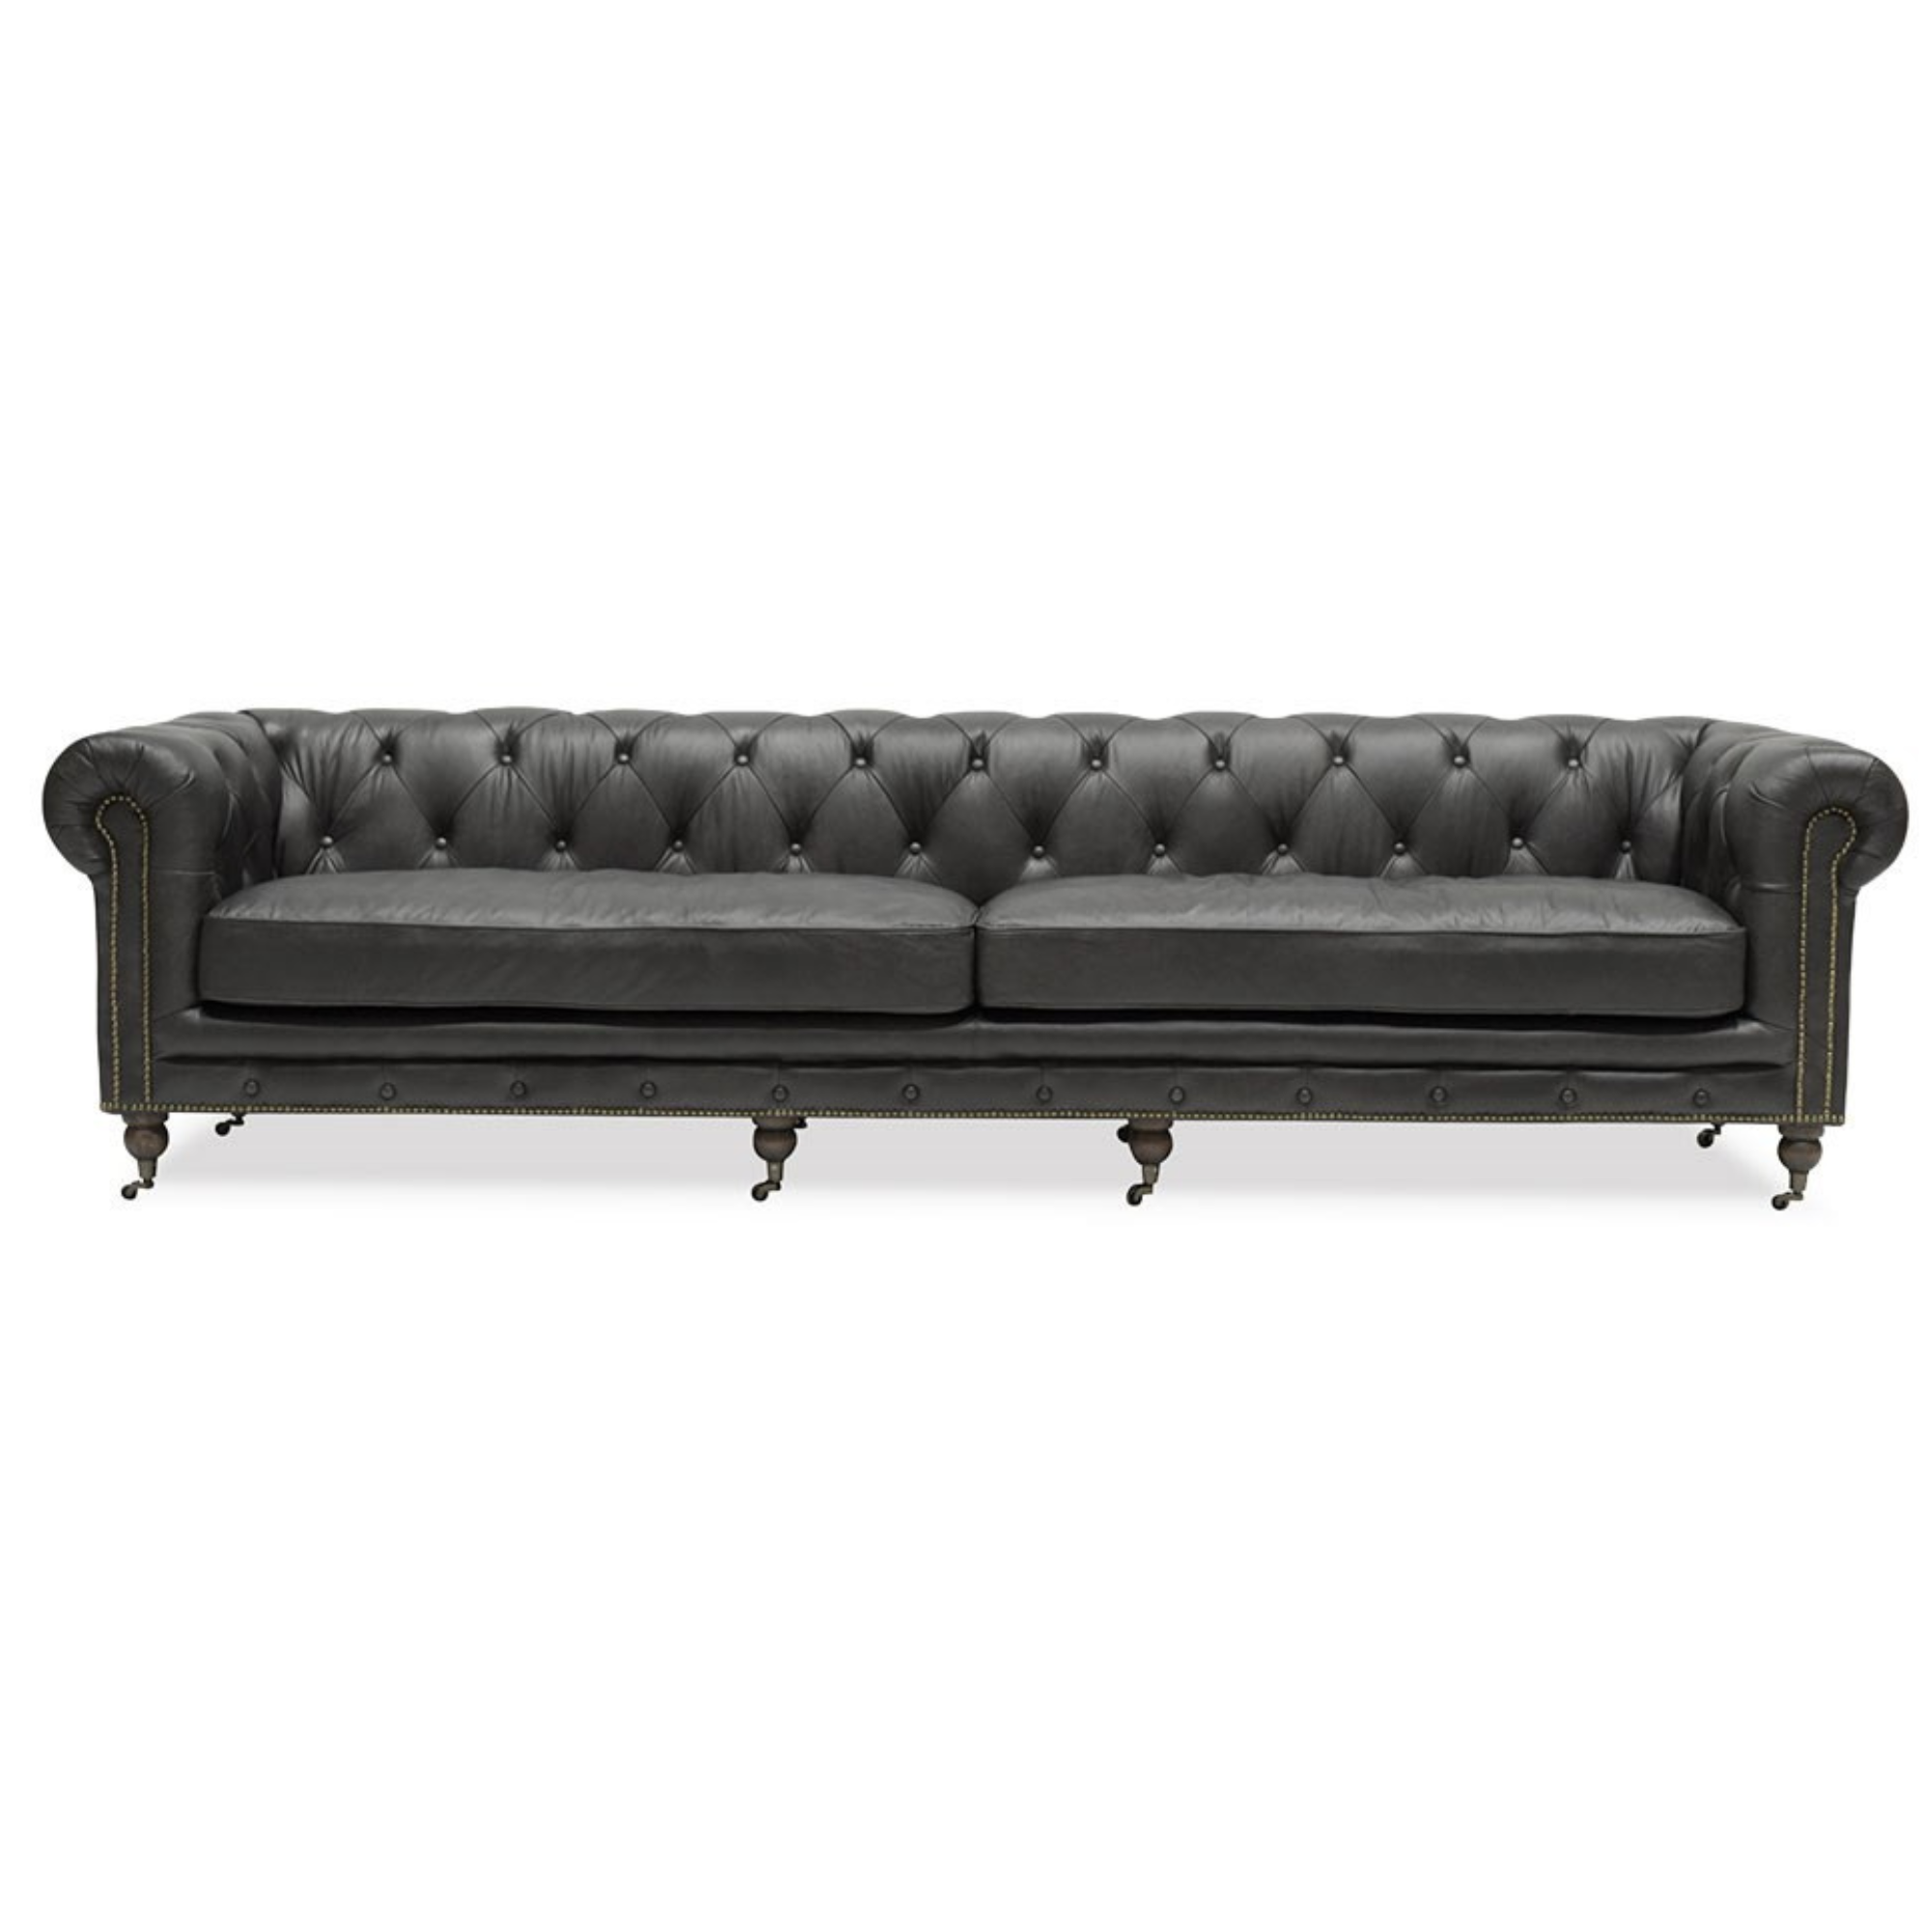 STANHOPE LEATHER 4 SEATER CHESTERFIELD